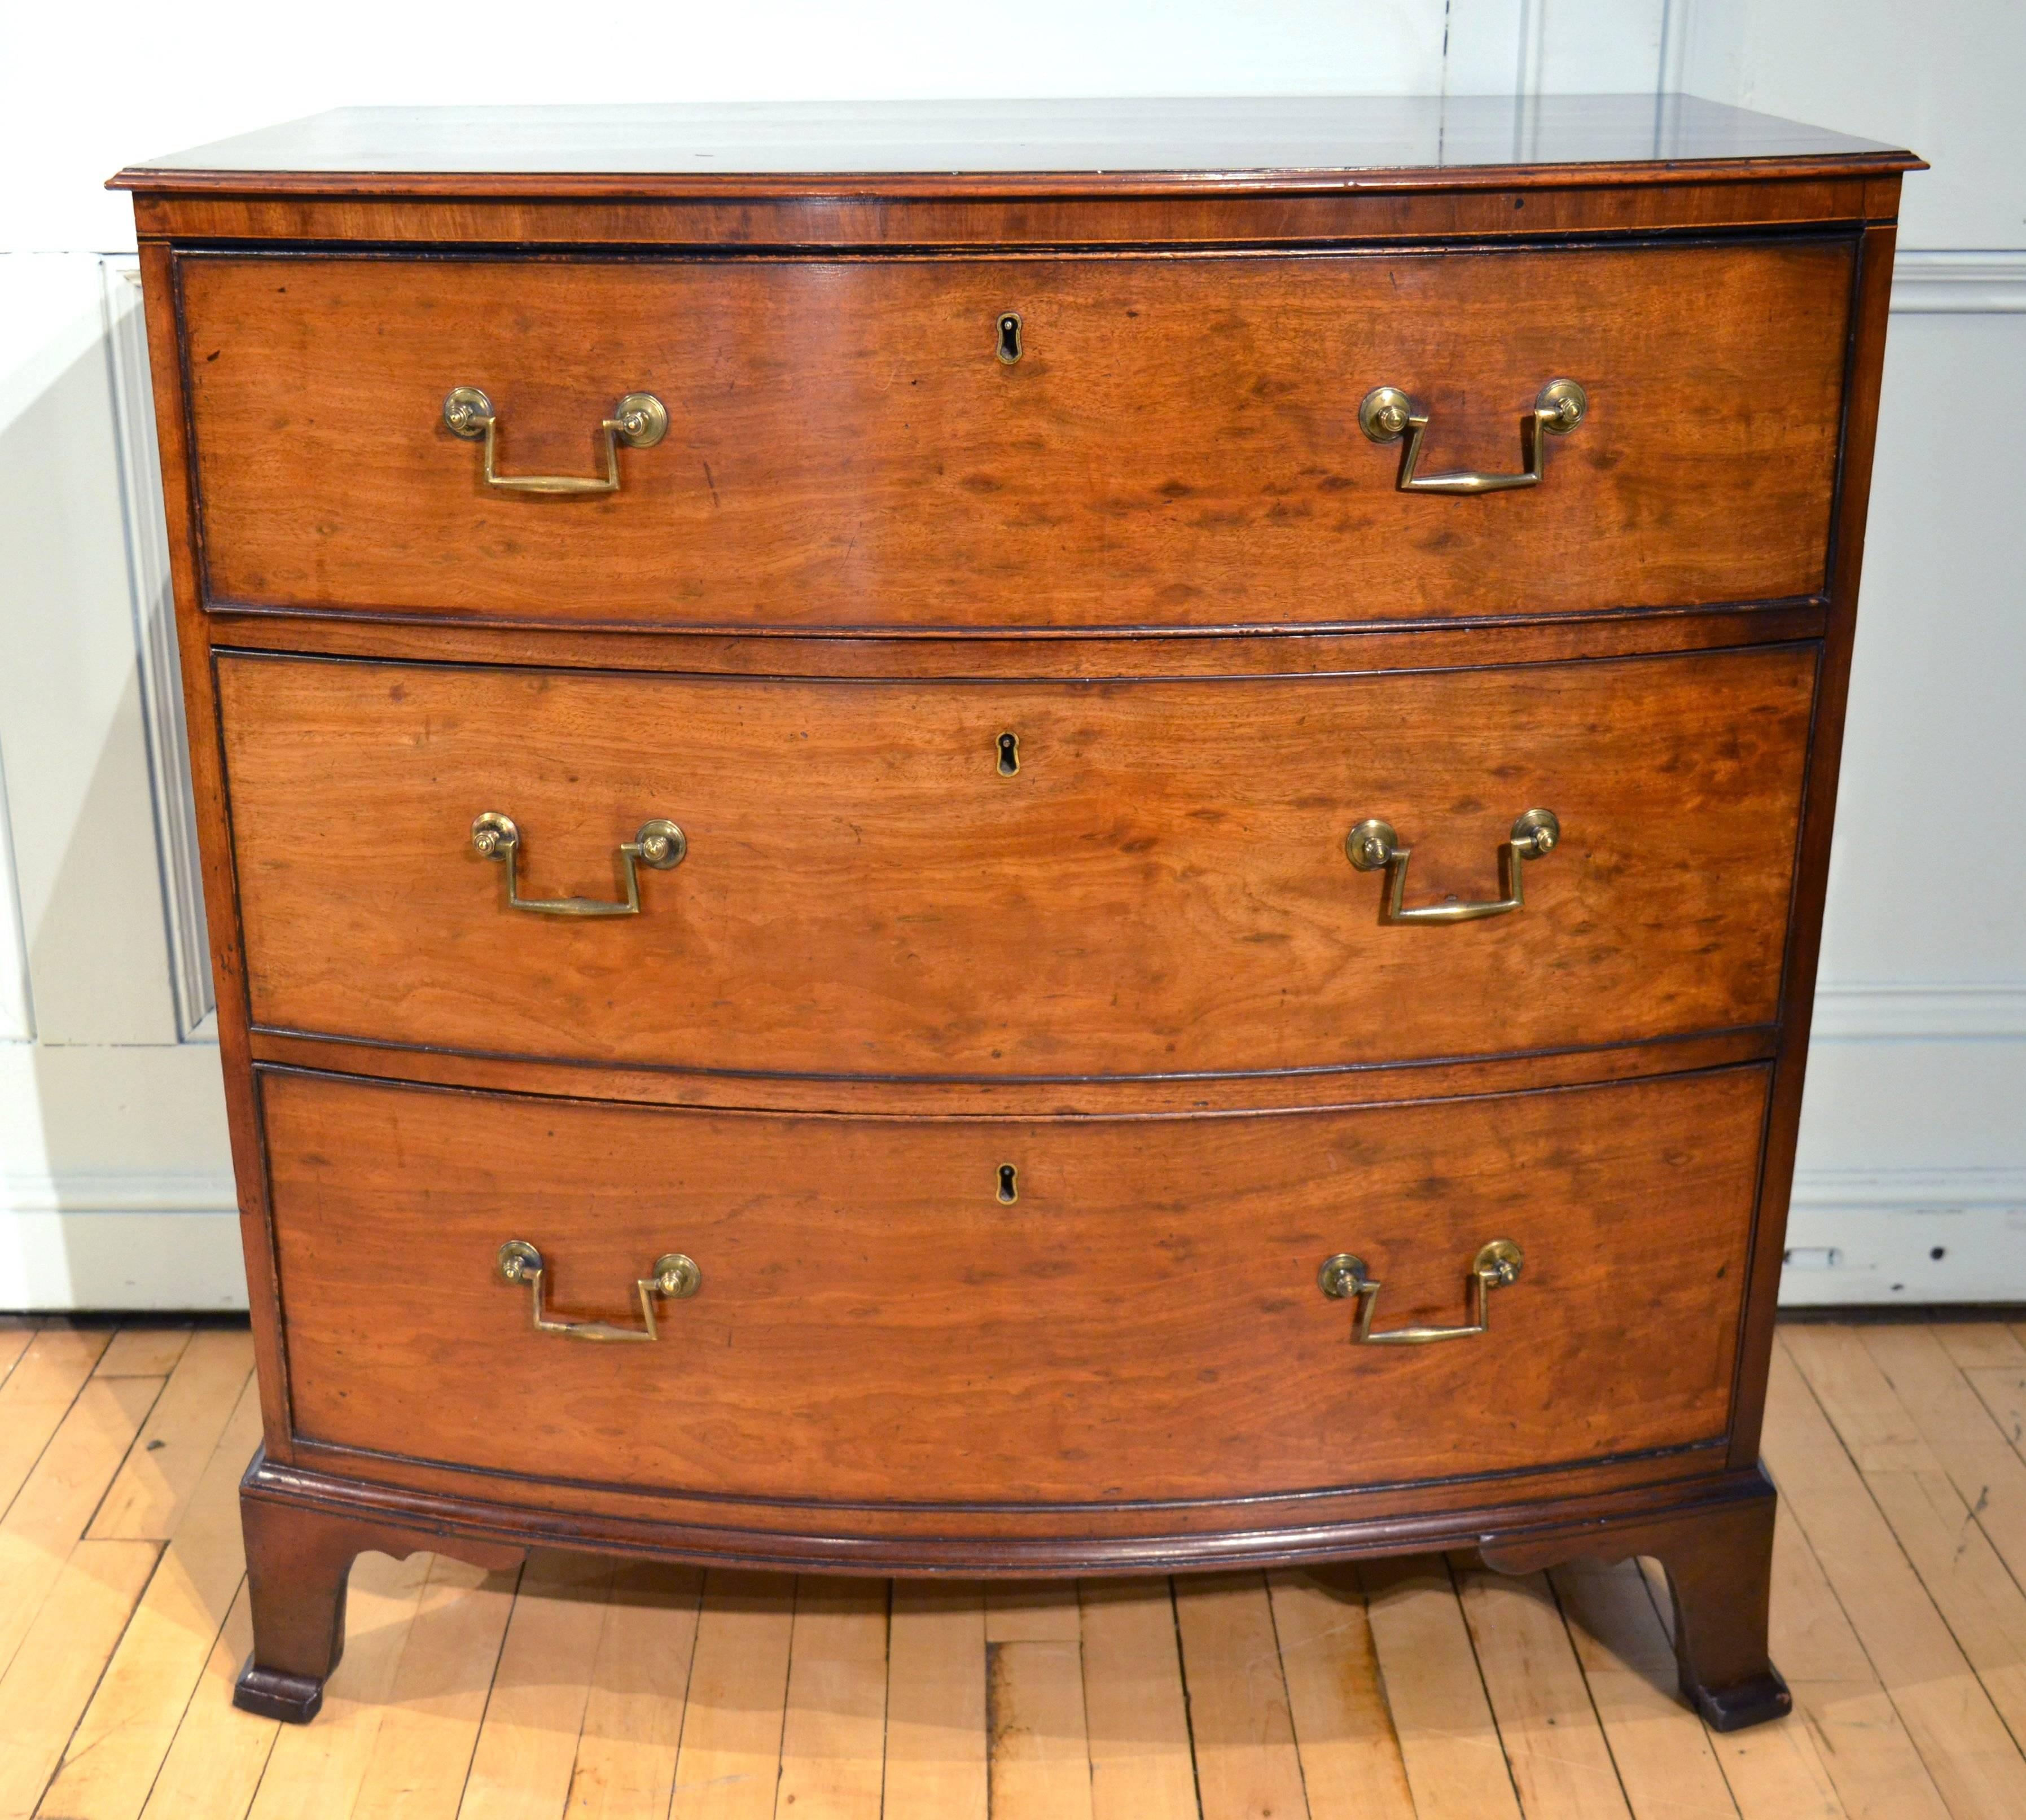 This handsome and excellent quality English Regency mahogany chest of drawers features a bow front design with ebony and boxwood stringing. The chest has three long, well-proportioned drawers with the original handles as well as locks and key. It